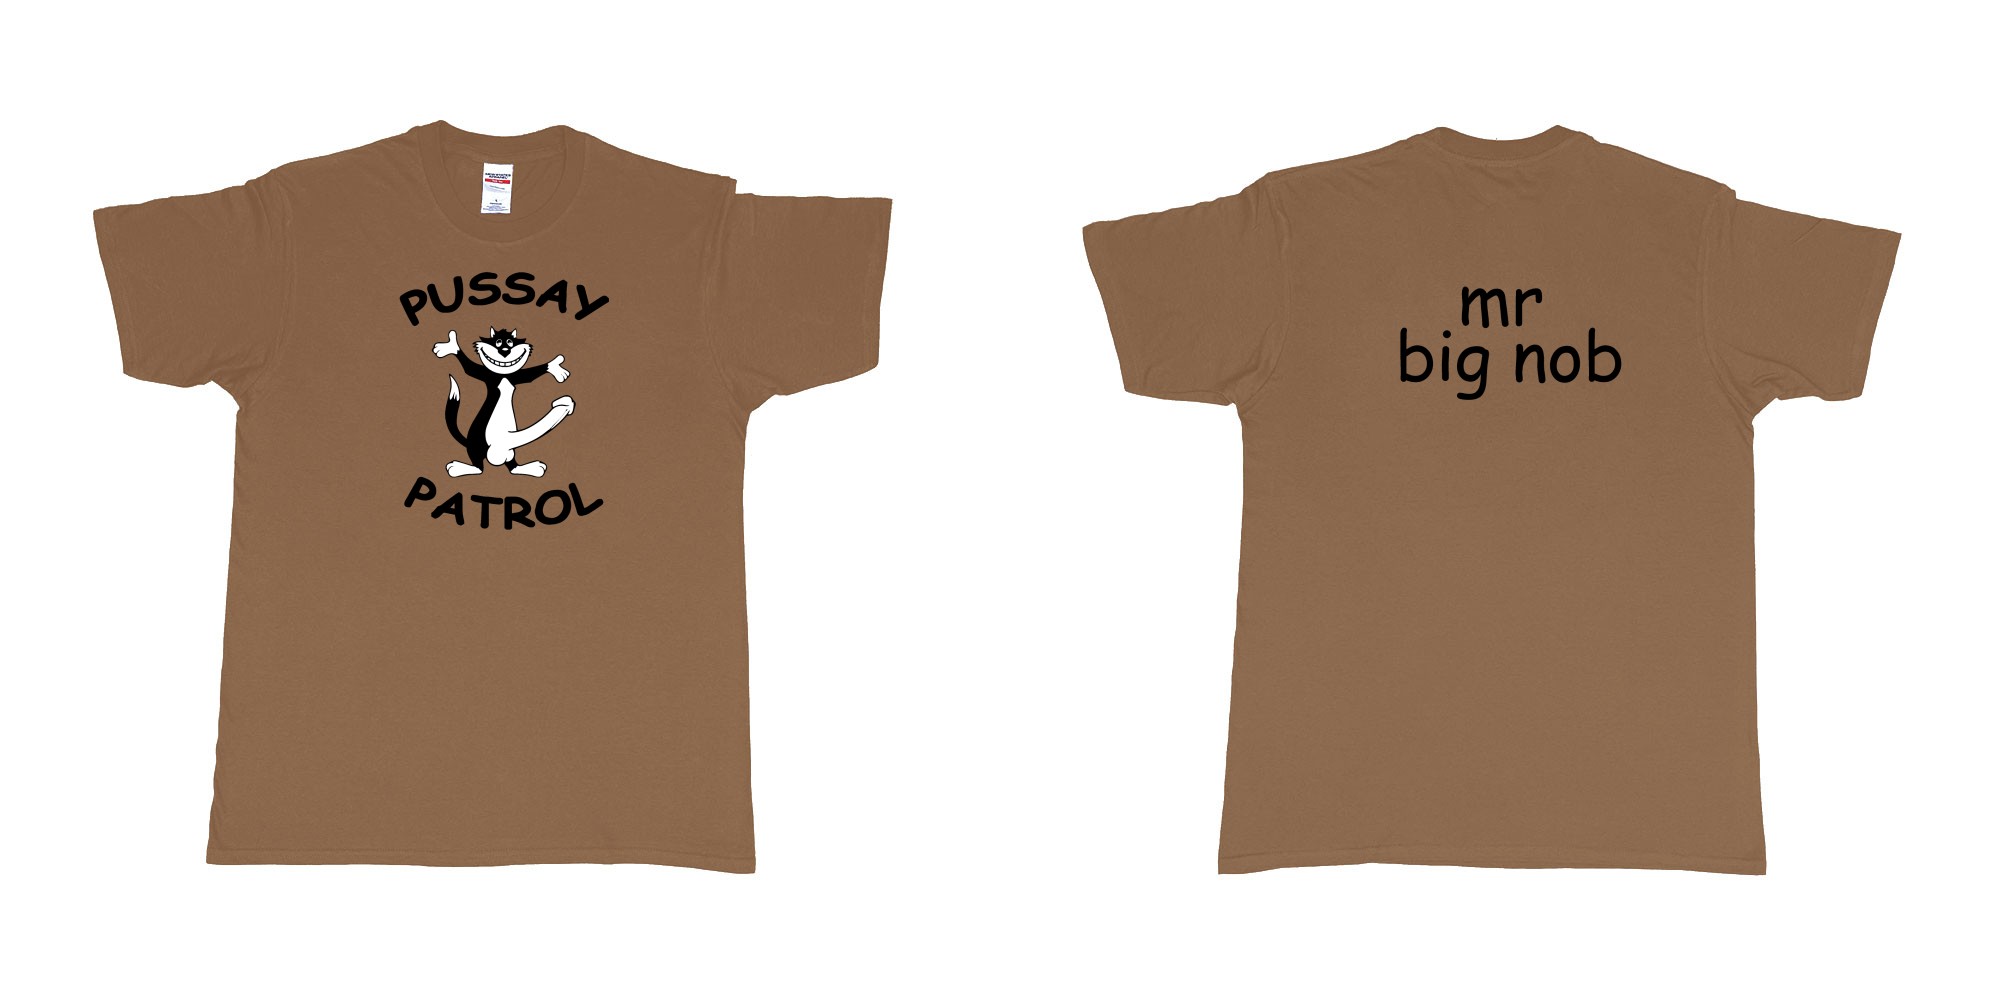 Custom tshirt design TPW Pussay Patrol in fabric color chestnut choice your own text made in Bali by The Pirate Way